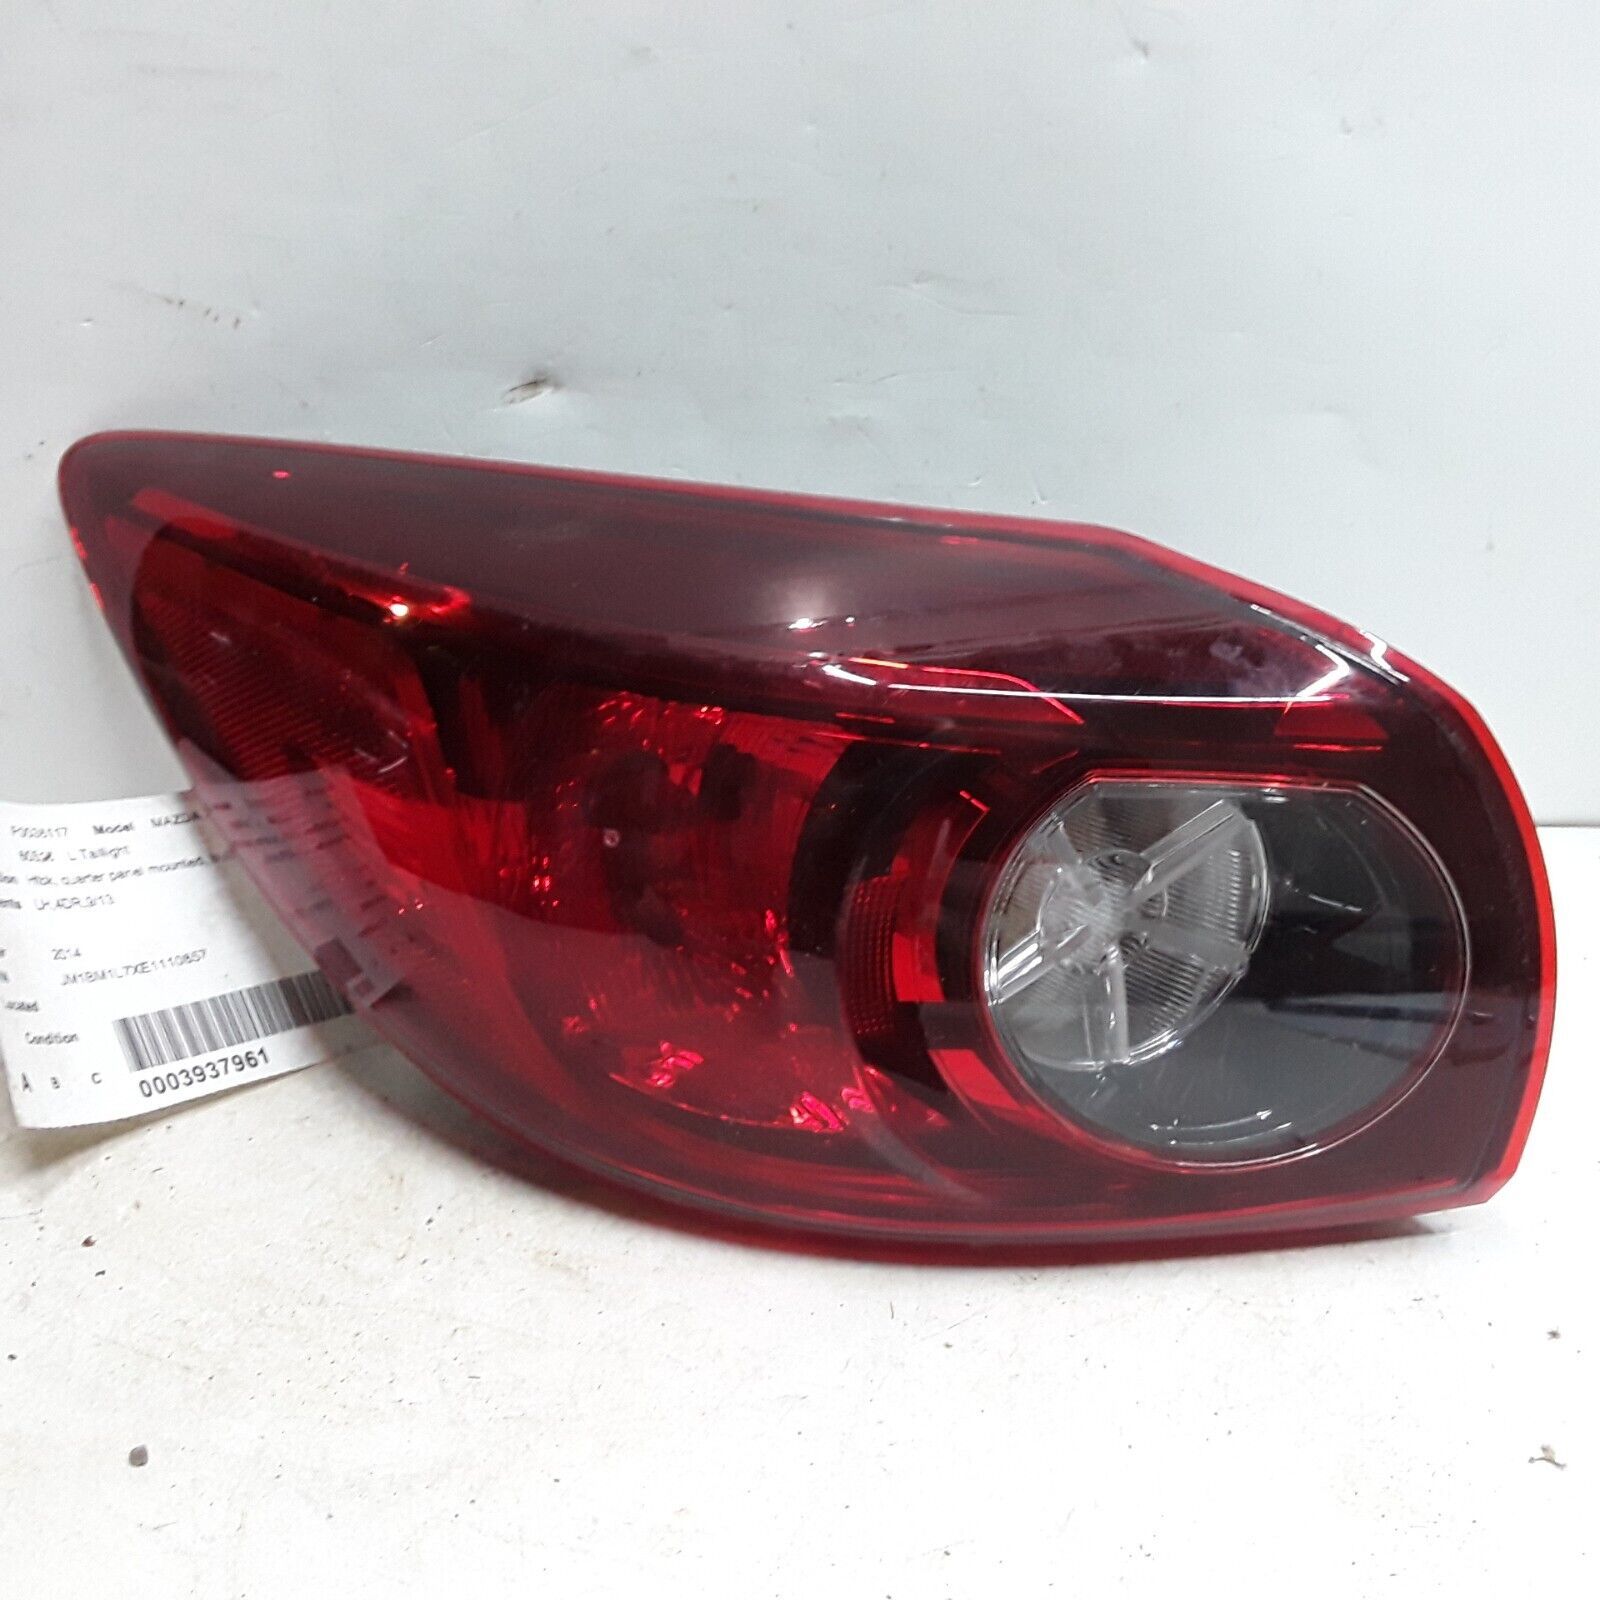 Primary image for 2014 - 2018 Mazda 3 hatchback left drivers tail light assembly bulb type OEM